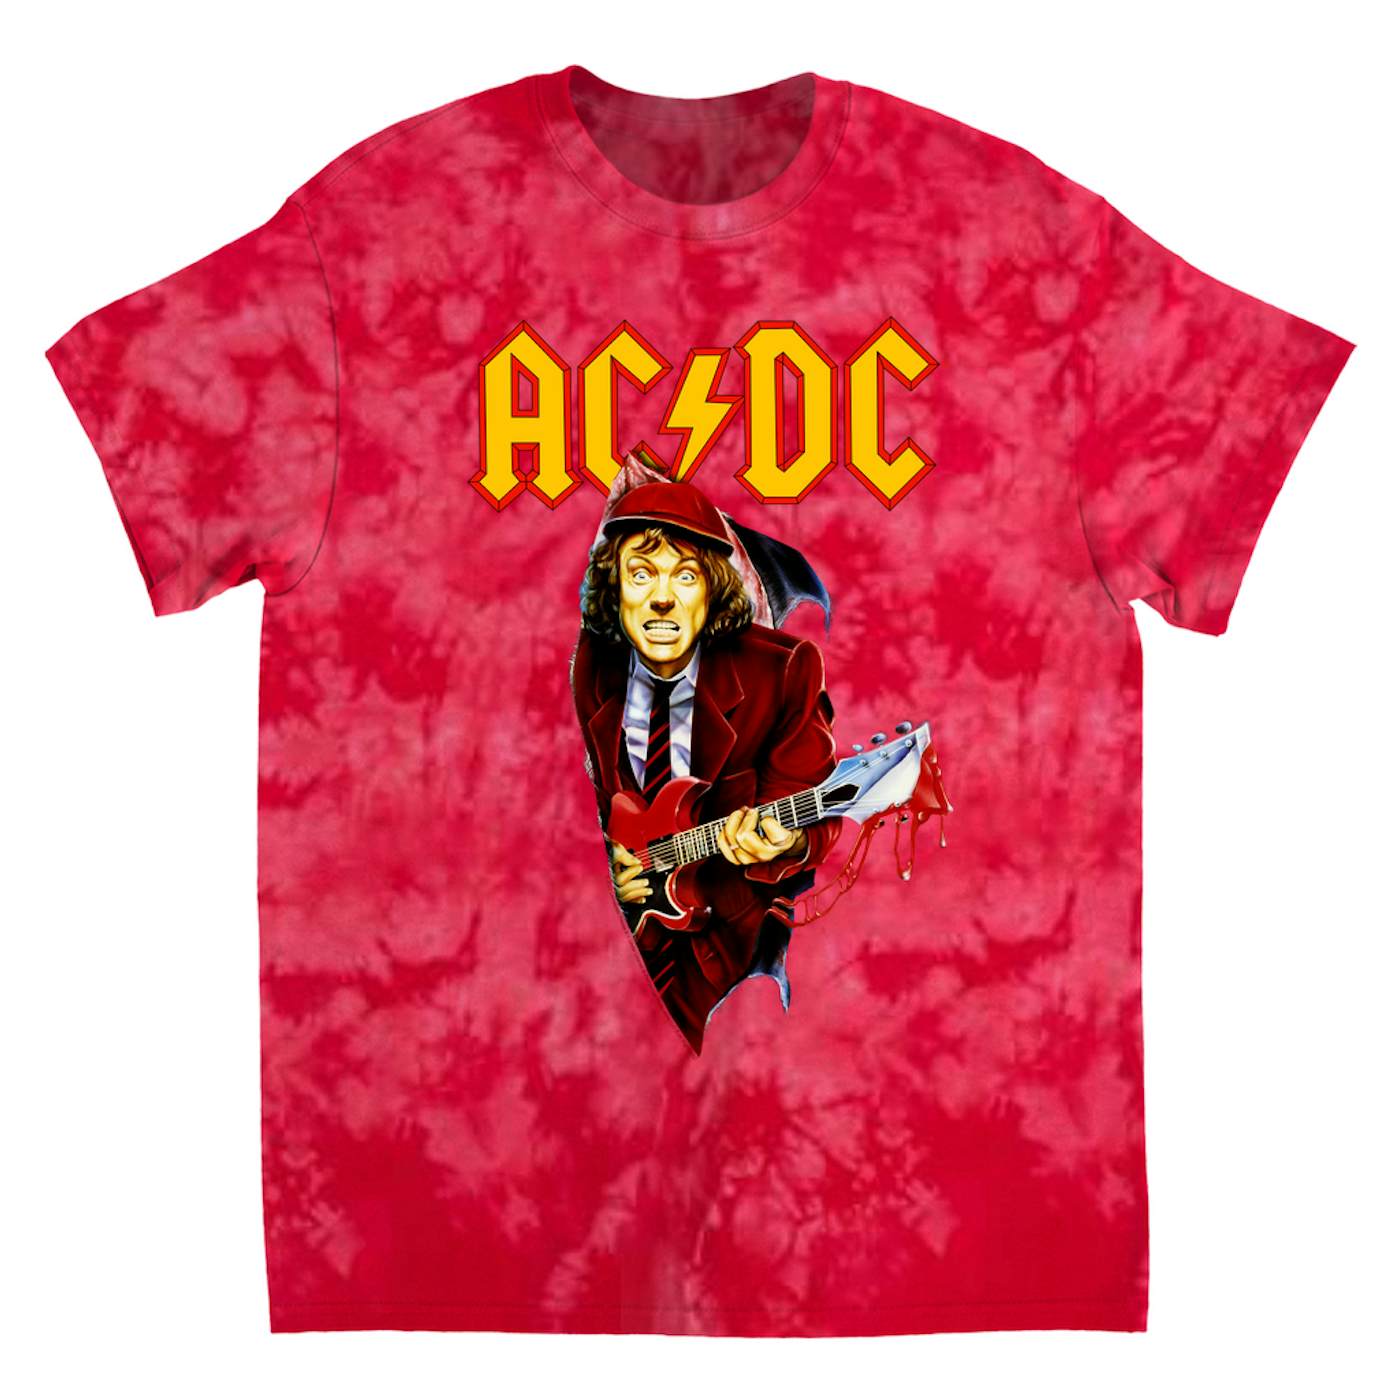 AC/DC T-Shirt | Angus Young With Bloody Guitar Design ACDC Tie Dye Shirt